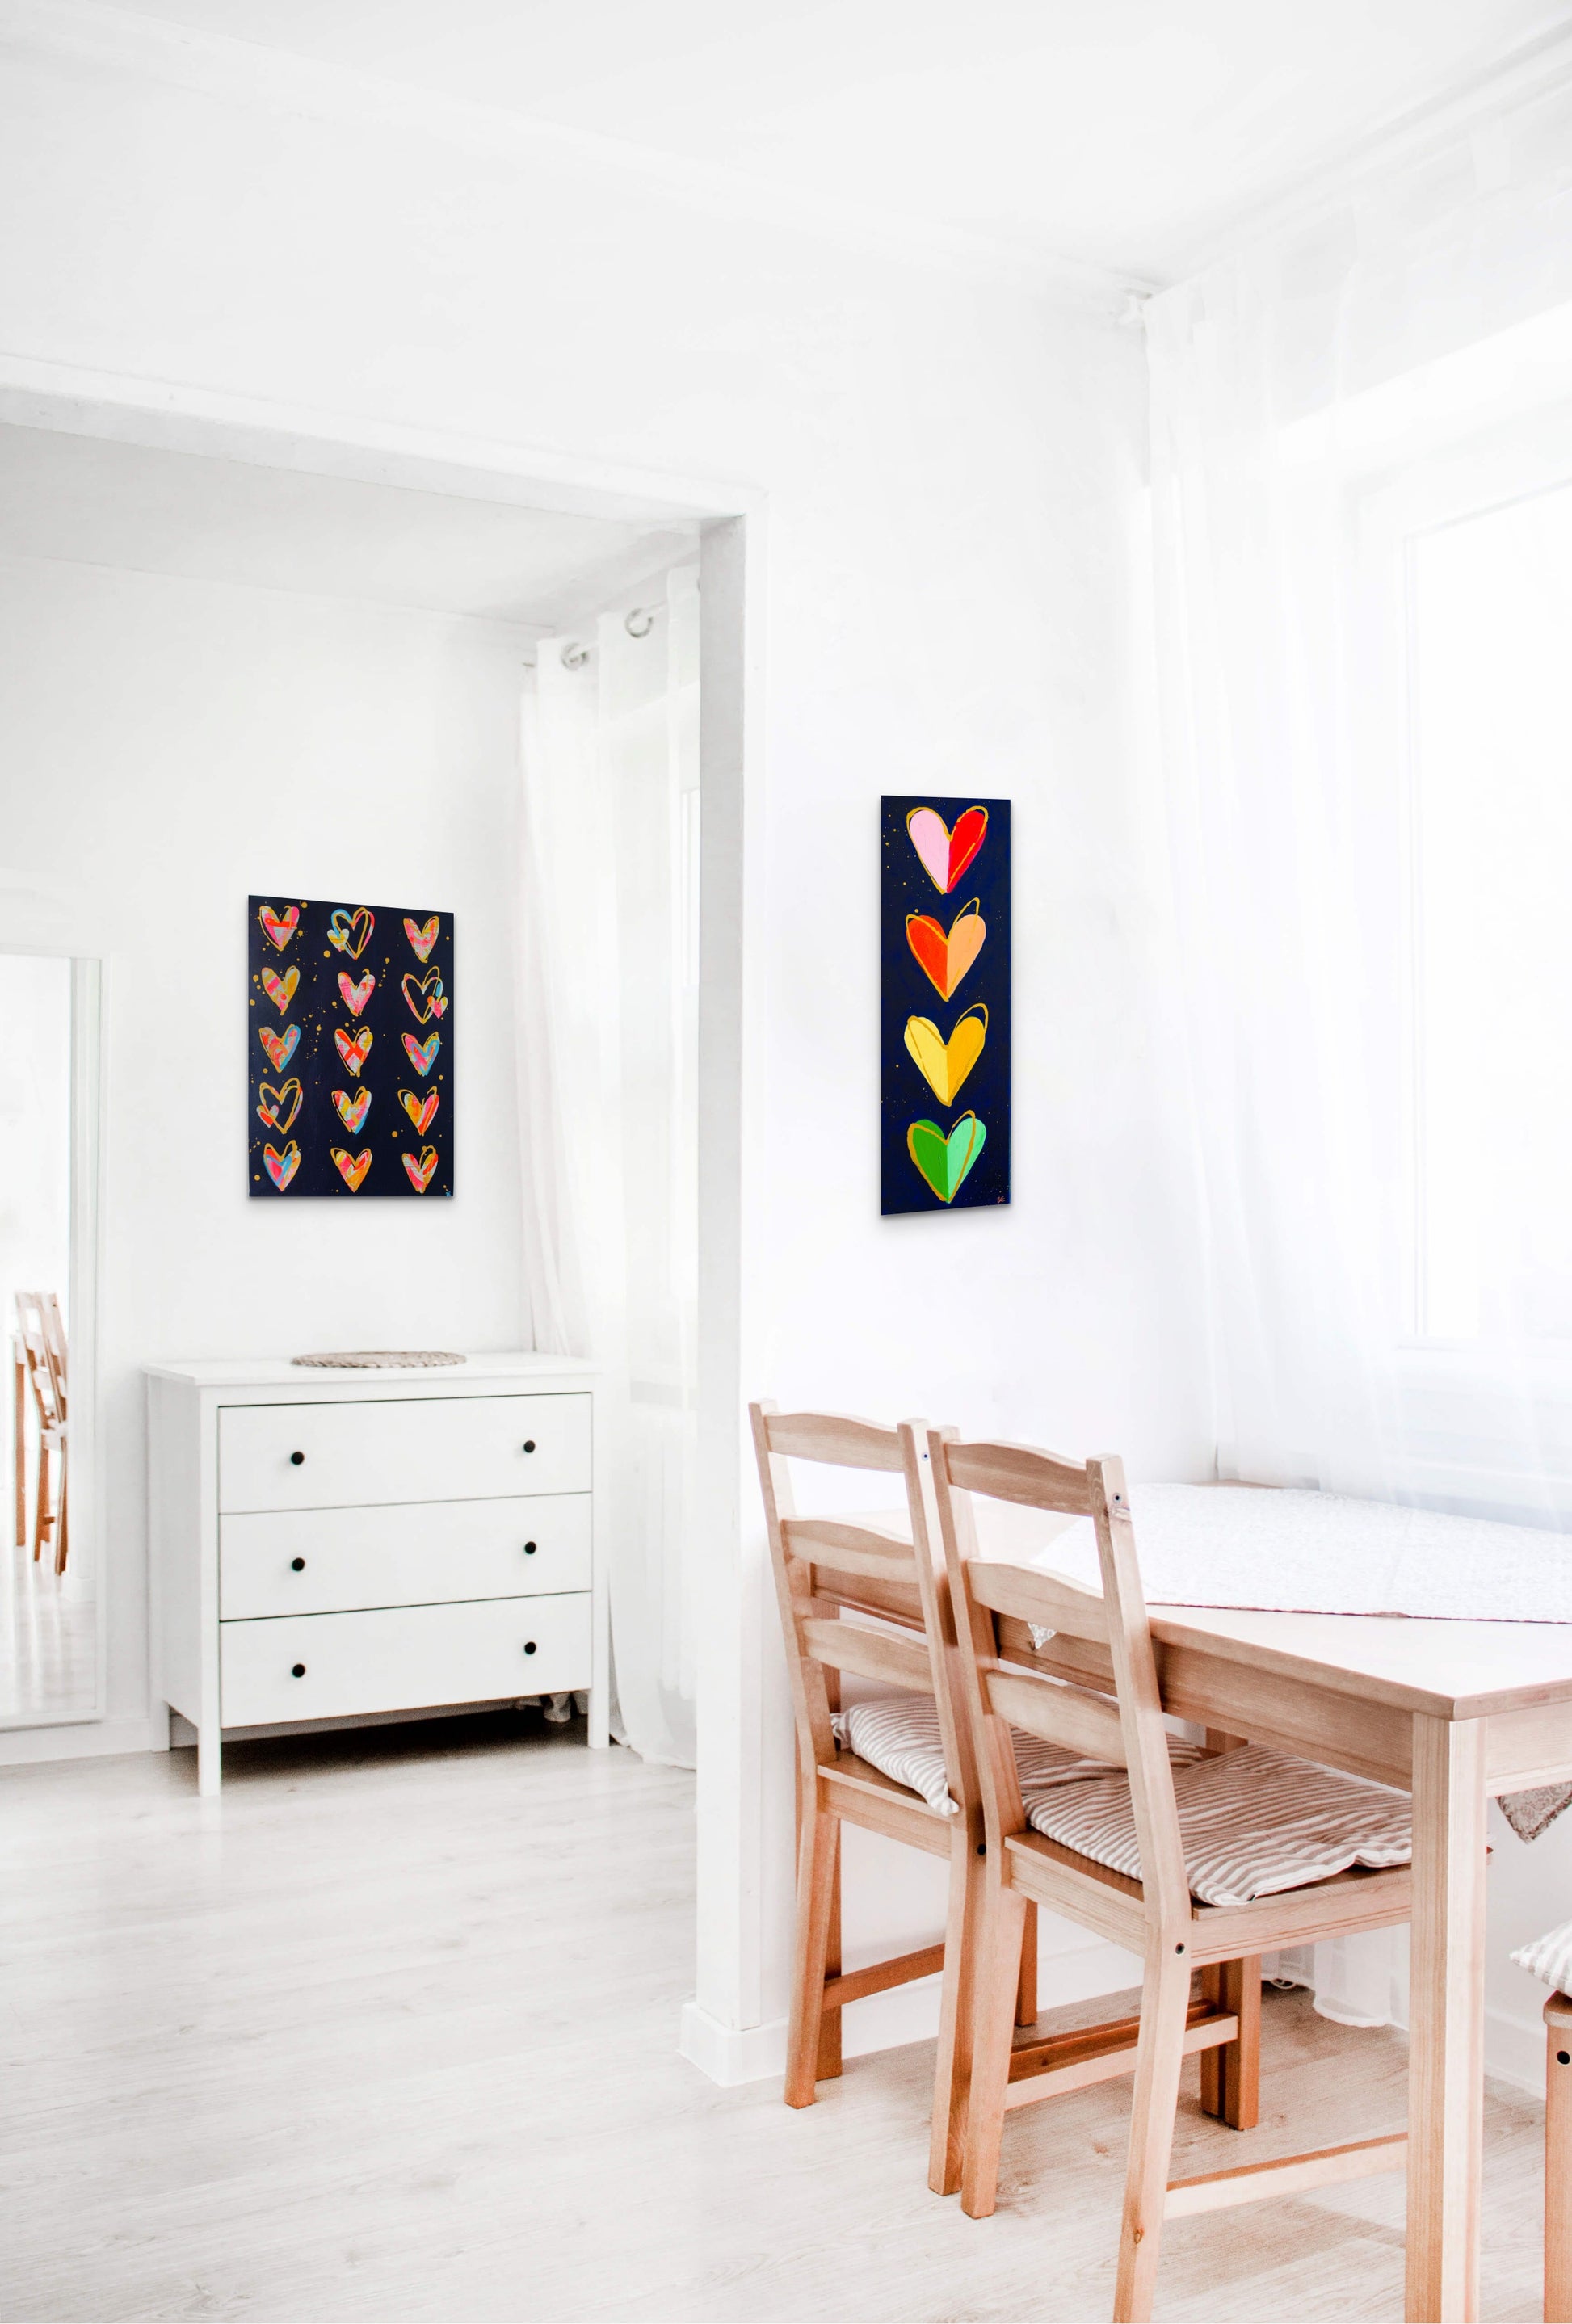 AFTER HOURS. Original painting on canvas with hearts from Bridget Edwards Studio. Narrow painting, art for a narrow wall space. Two Bridget Edwards Studio paintings on white walls in adjoining rooms.